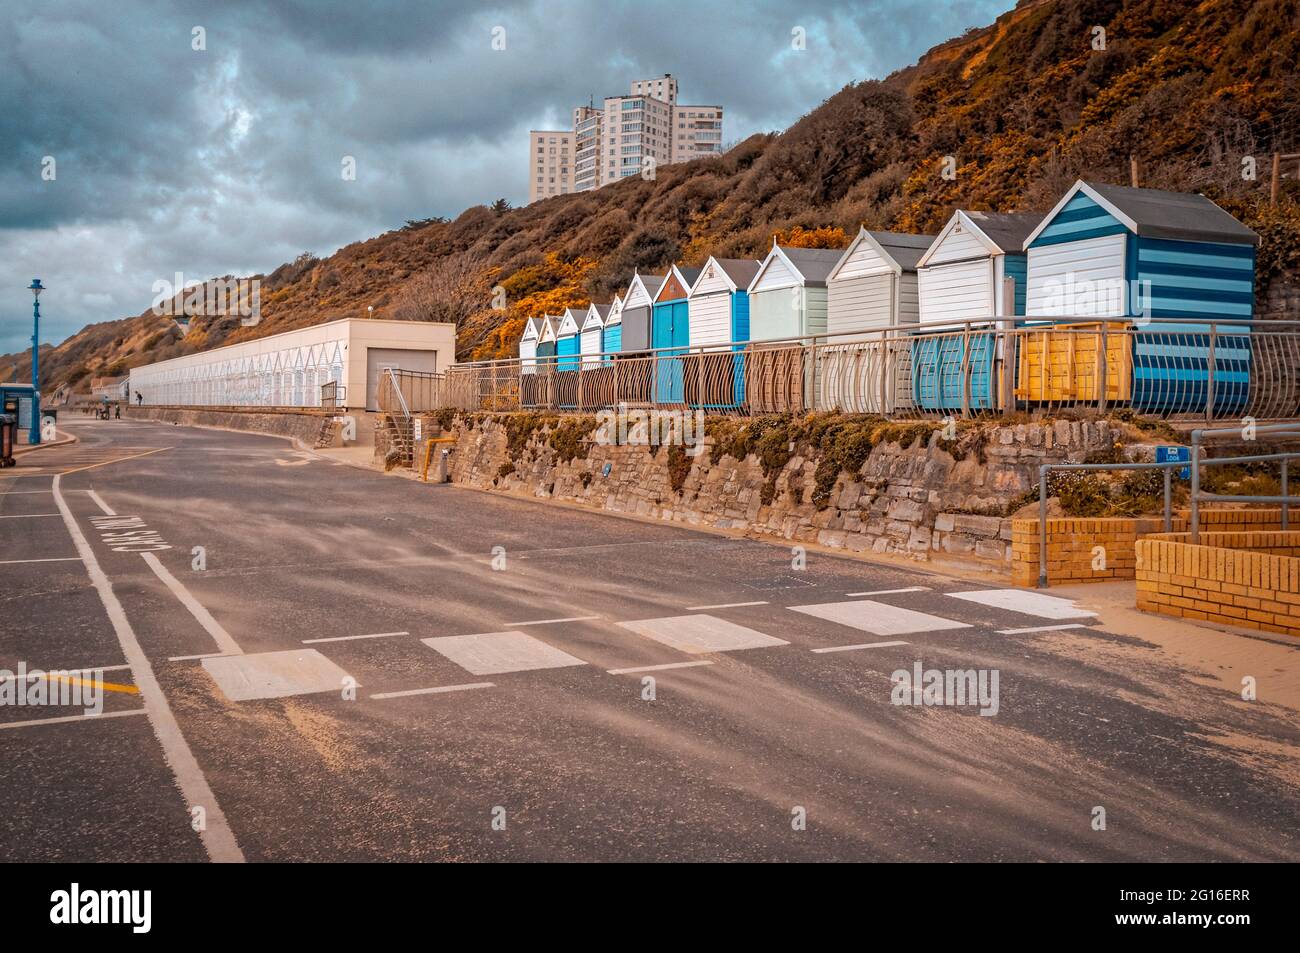 Boscombe Beach, Bournemouth, Angleterre Banque D'Images